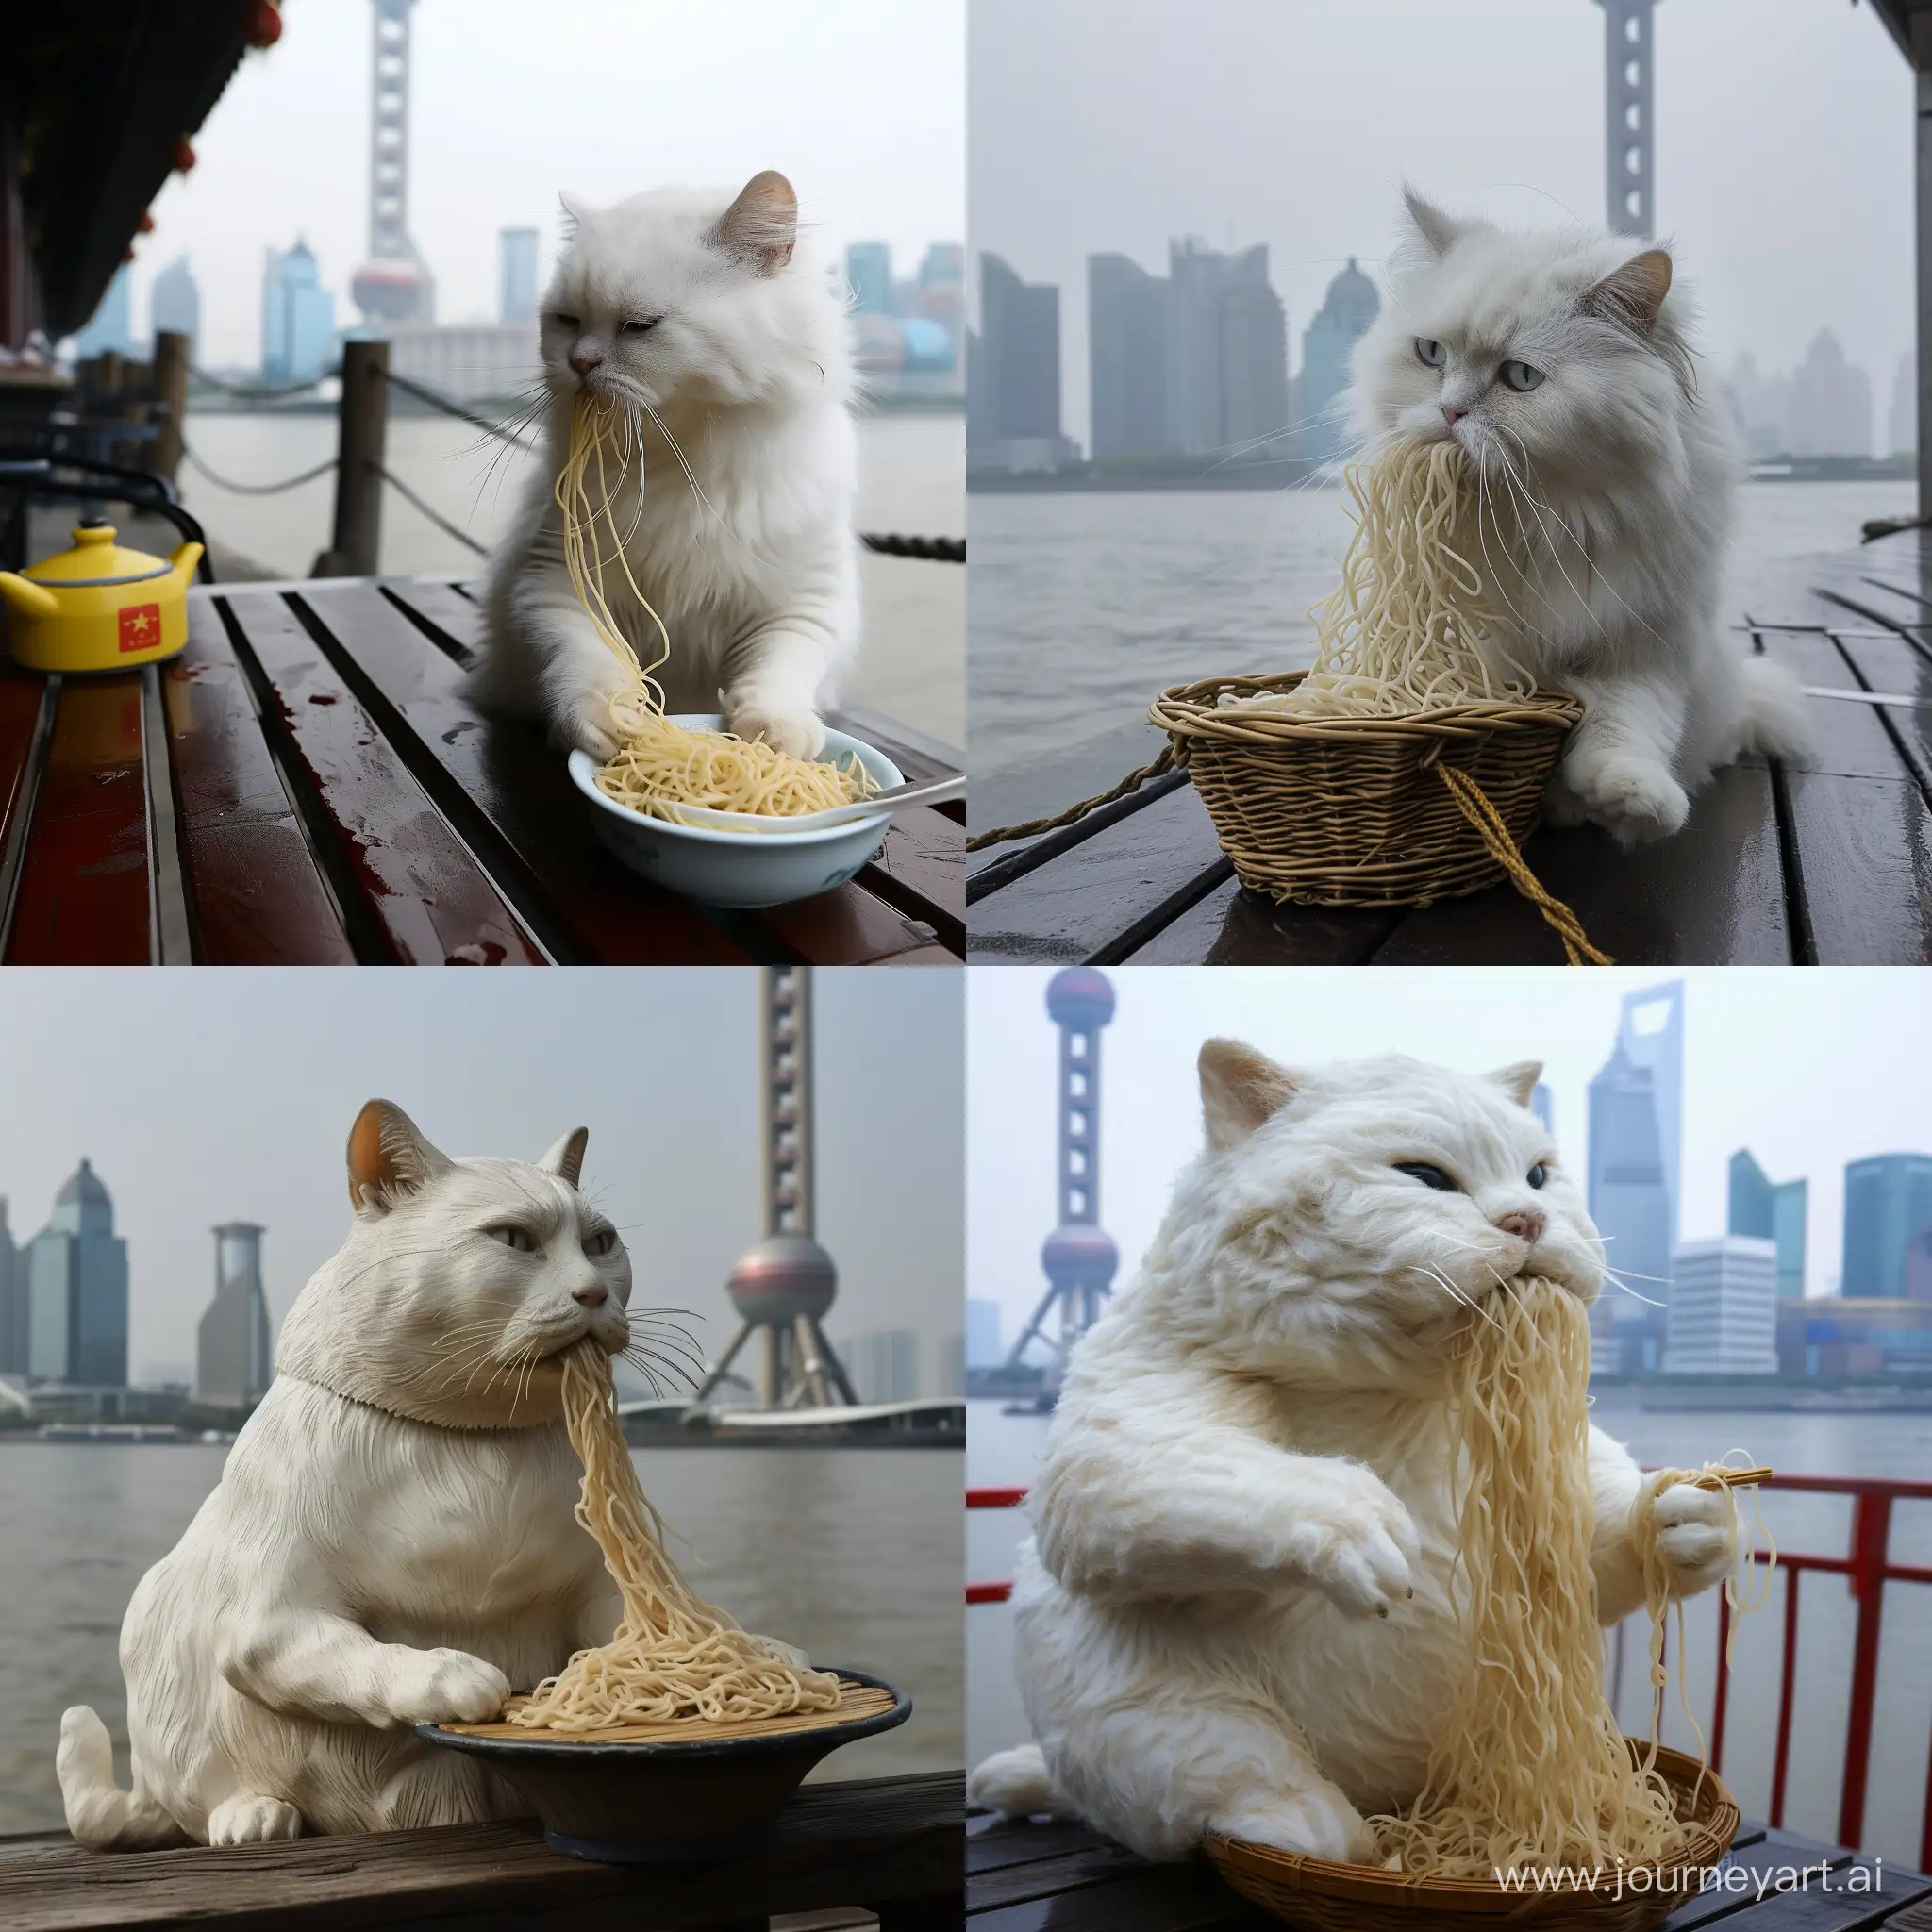 Charming-White-Cat-Enjoying-Noodles-by-the-Shanghai-Waterfront